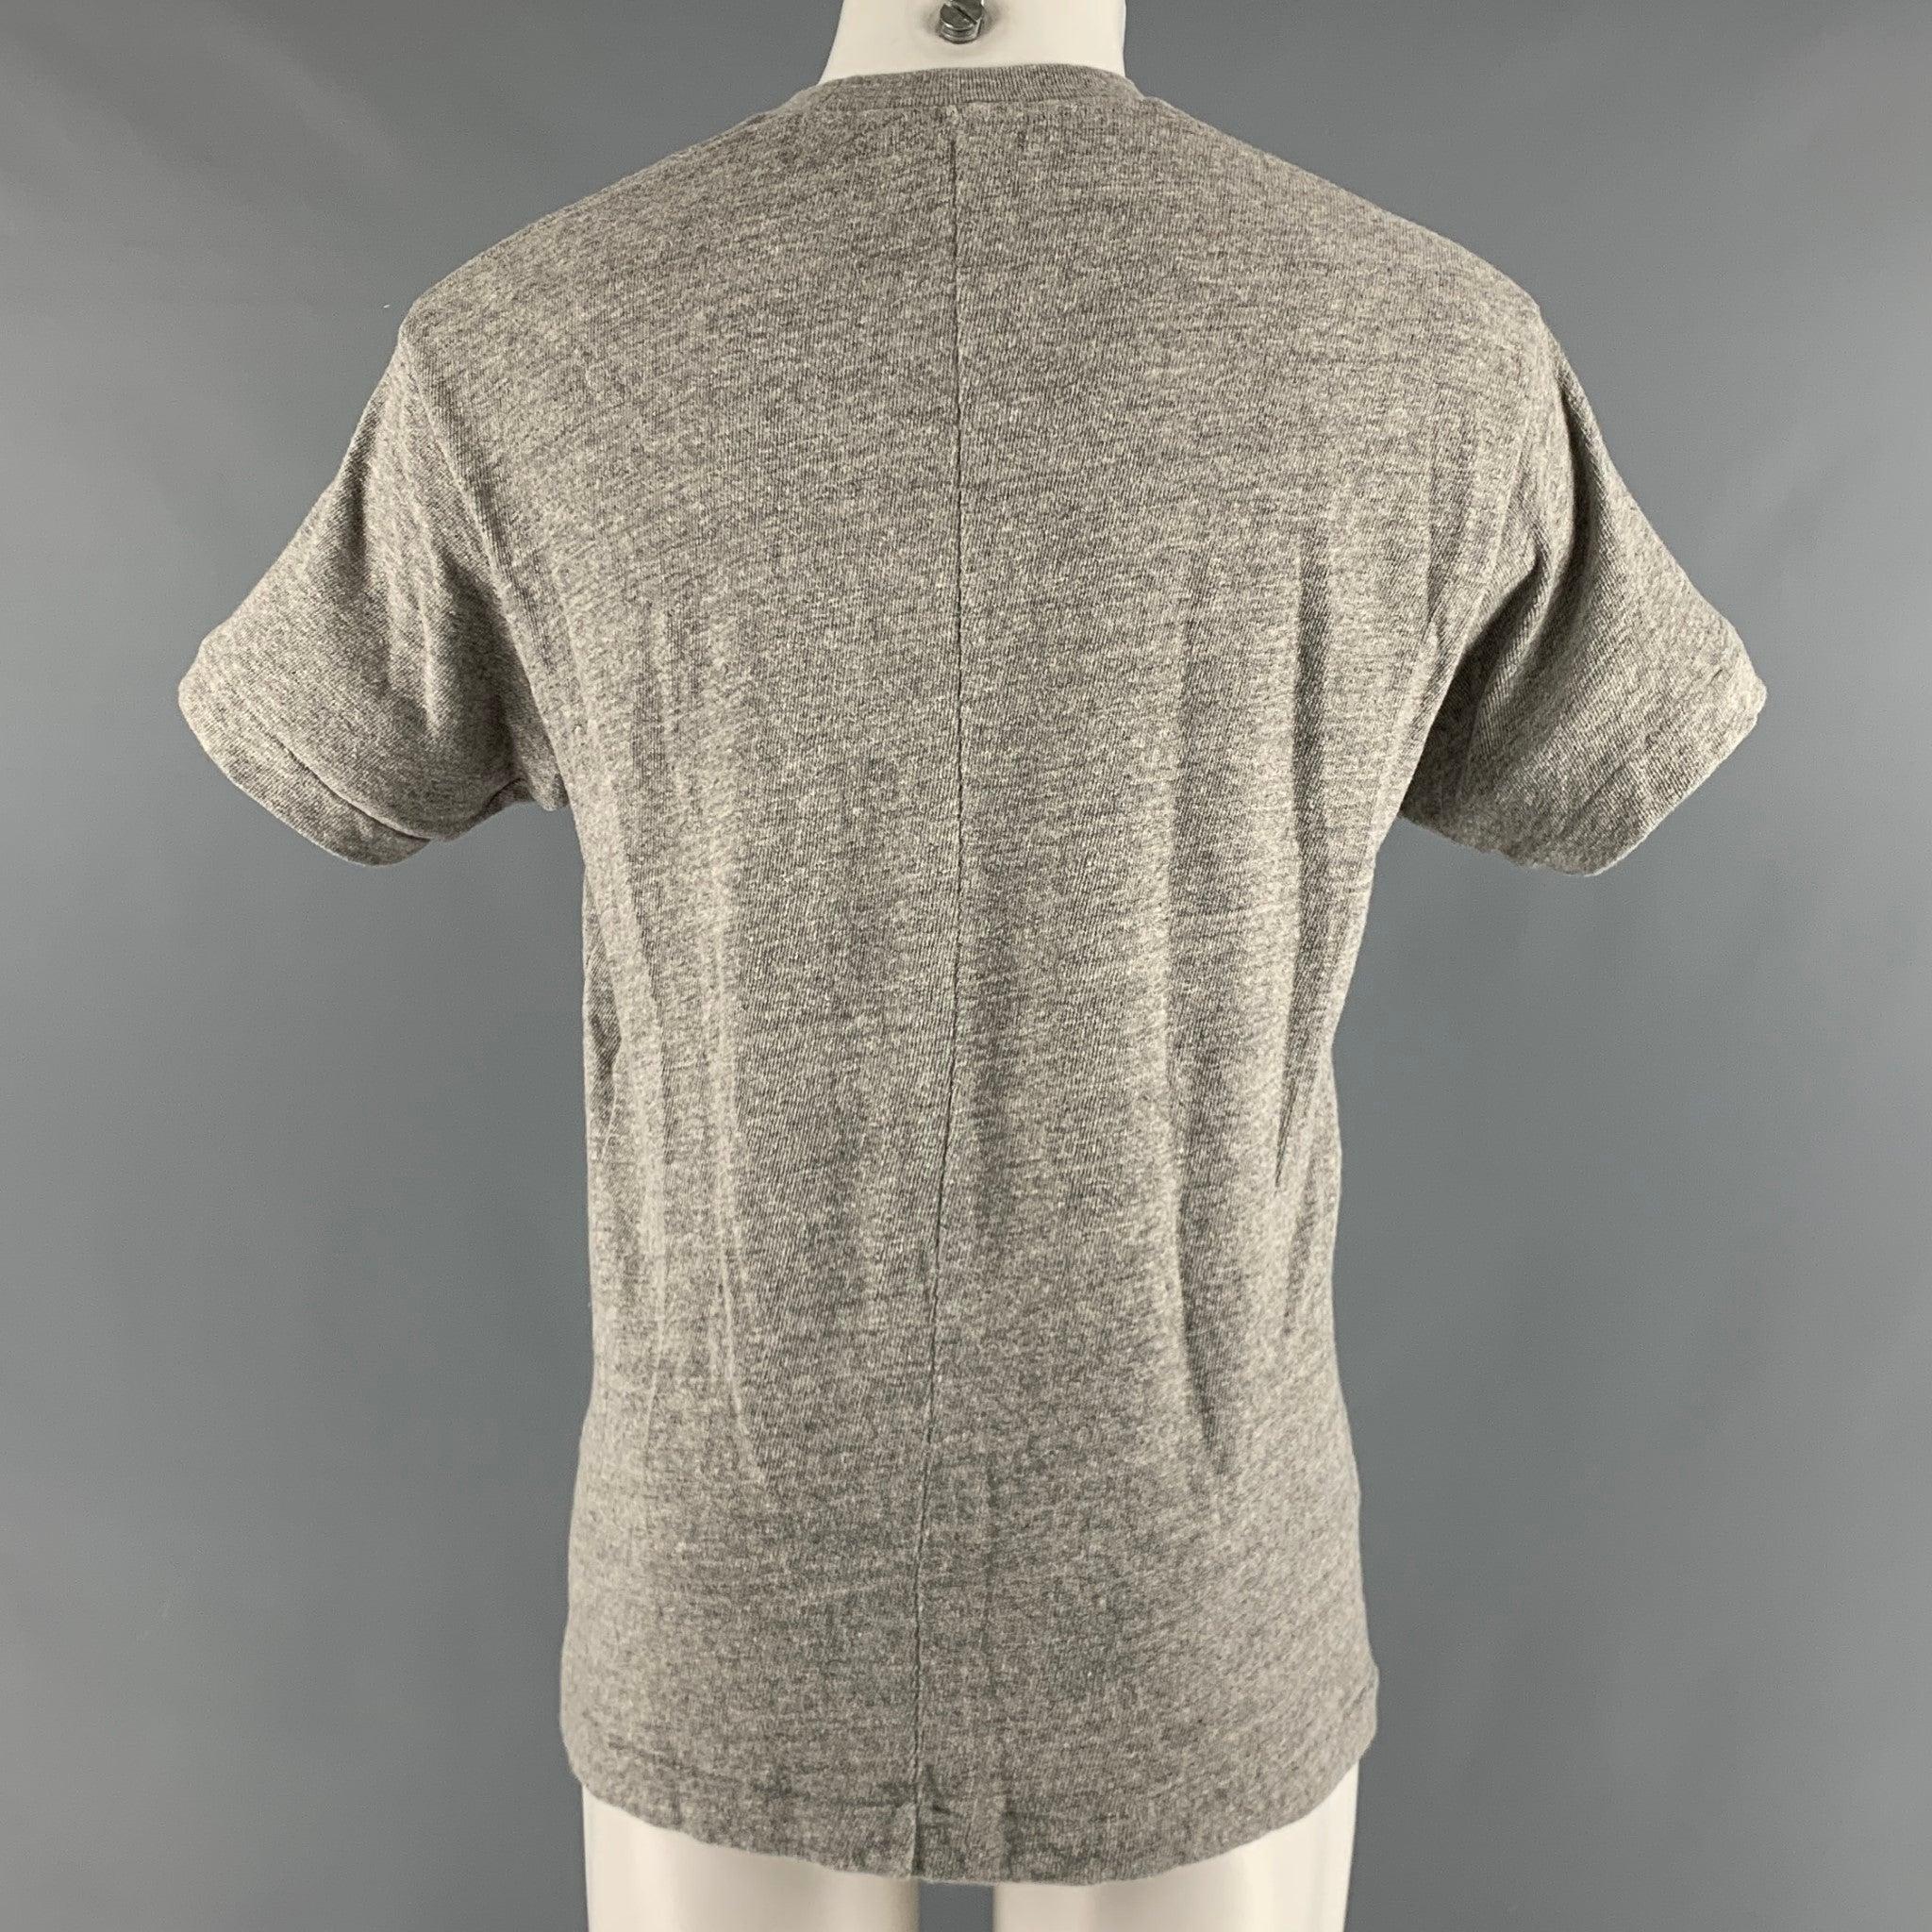 JOHN ELLIOTT Size S Grey Heather Cotton Short Sleeve T-shirt In Excellent Condition For Sale In San Francisco, CA